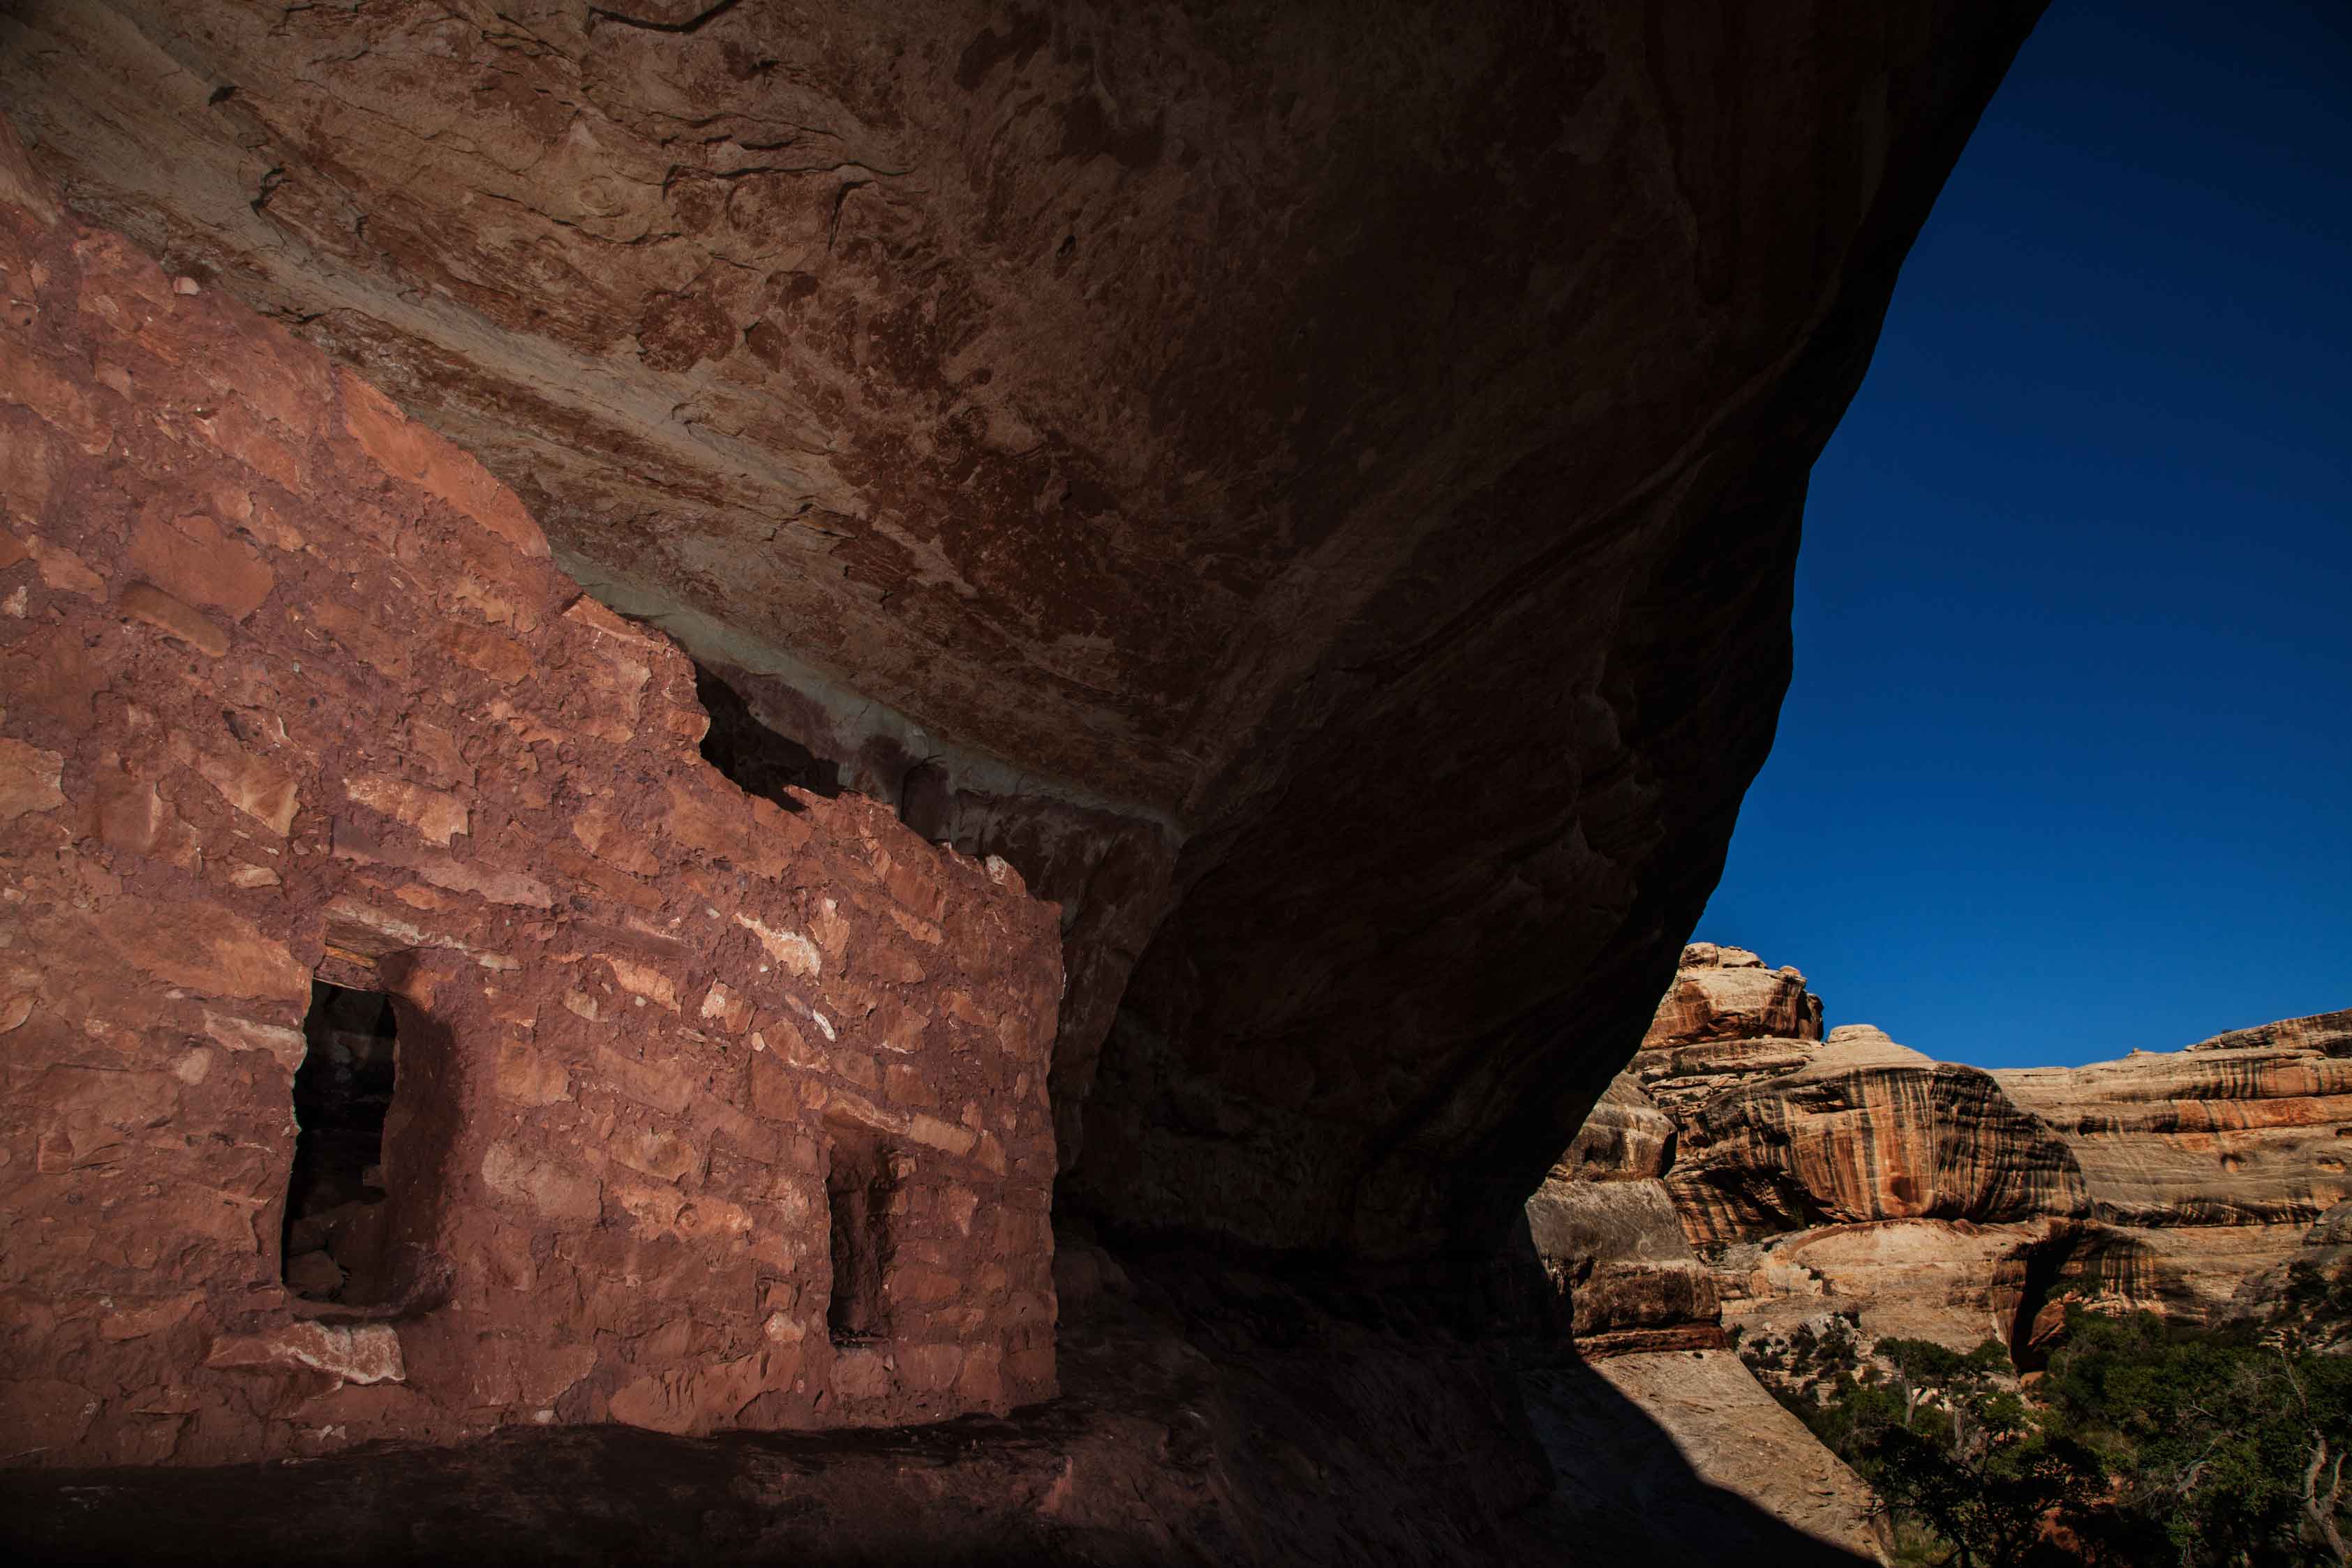 Part of the Horse Collar Ruin, an Ancestral Pueblo cliff dwelling in White Canyon within Natural Bridges National Monument, Utah.